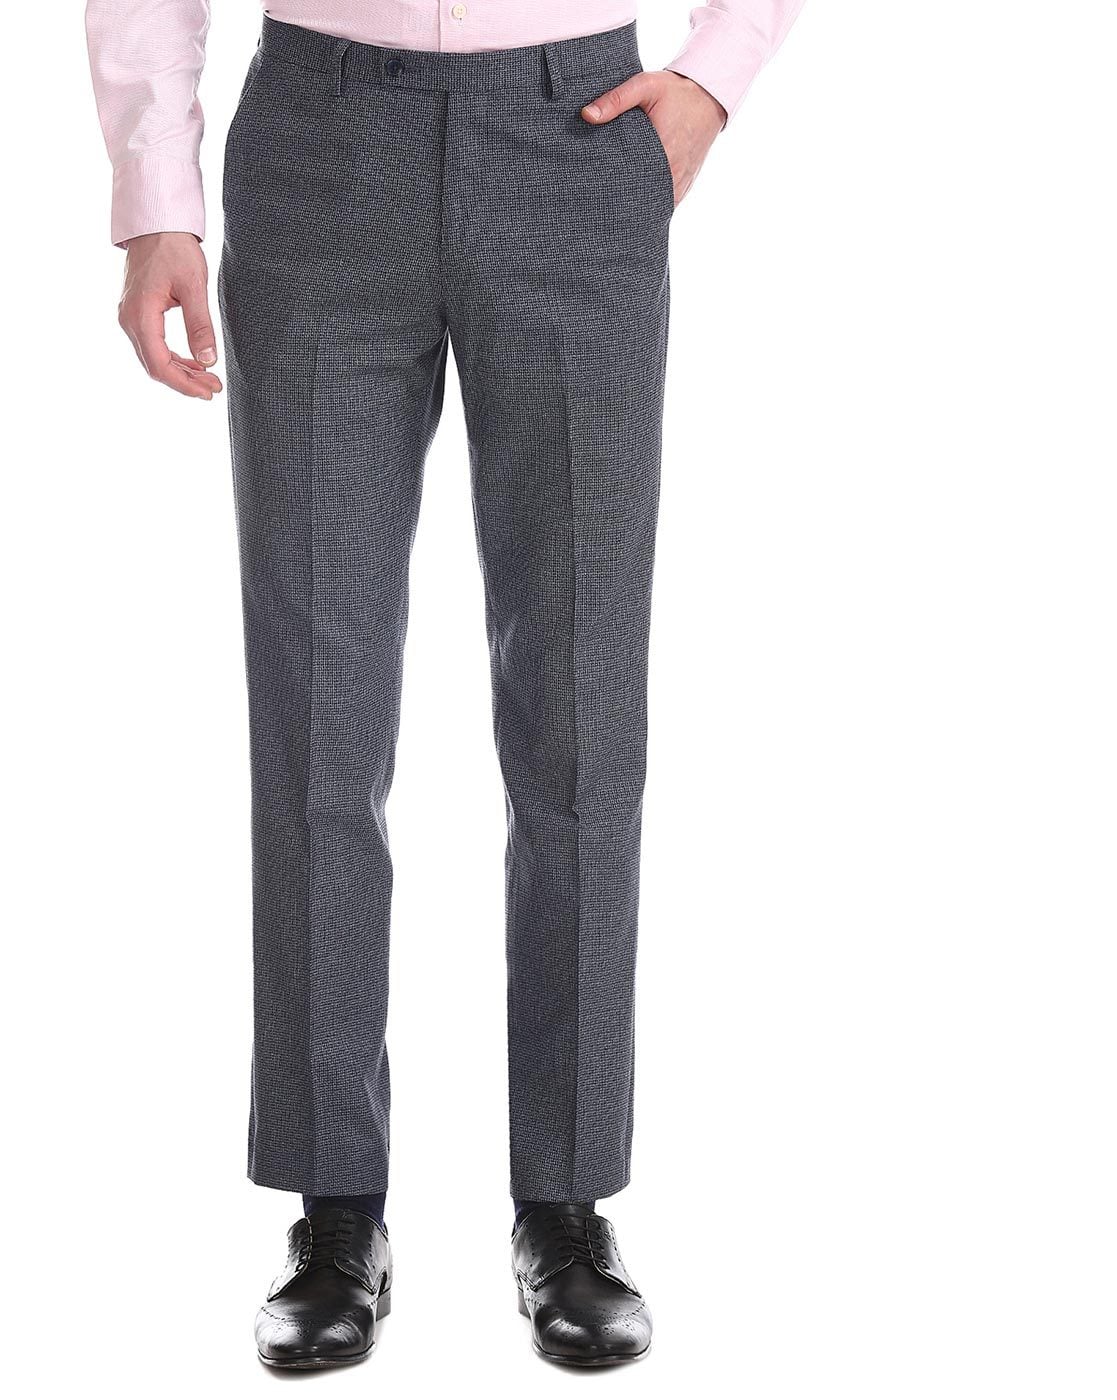 Buy Tapered Trousers Textured Printed  Home Delivery  Bonmarché